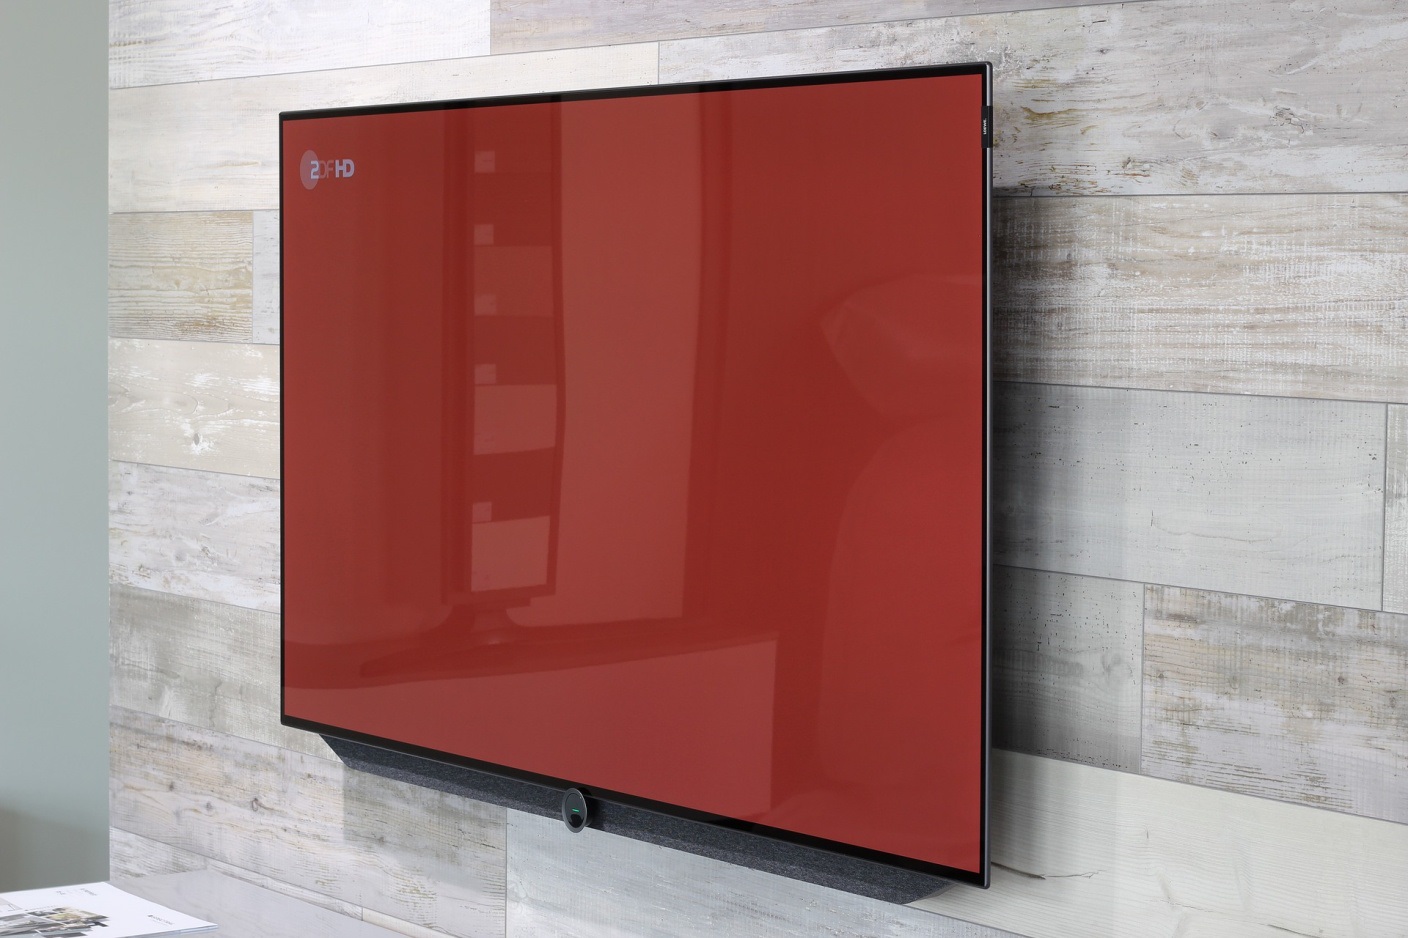 TV Wall Mounts can change the look of your living room